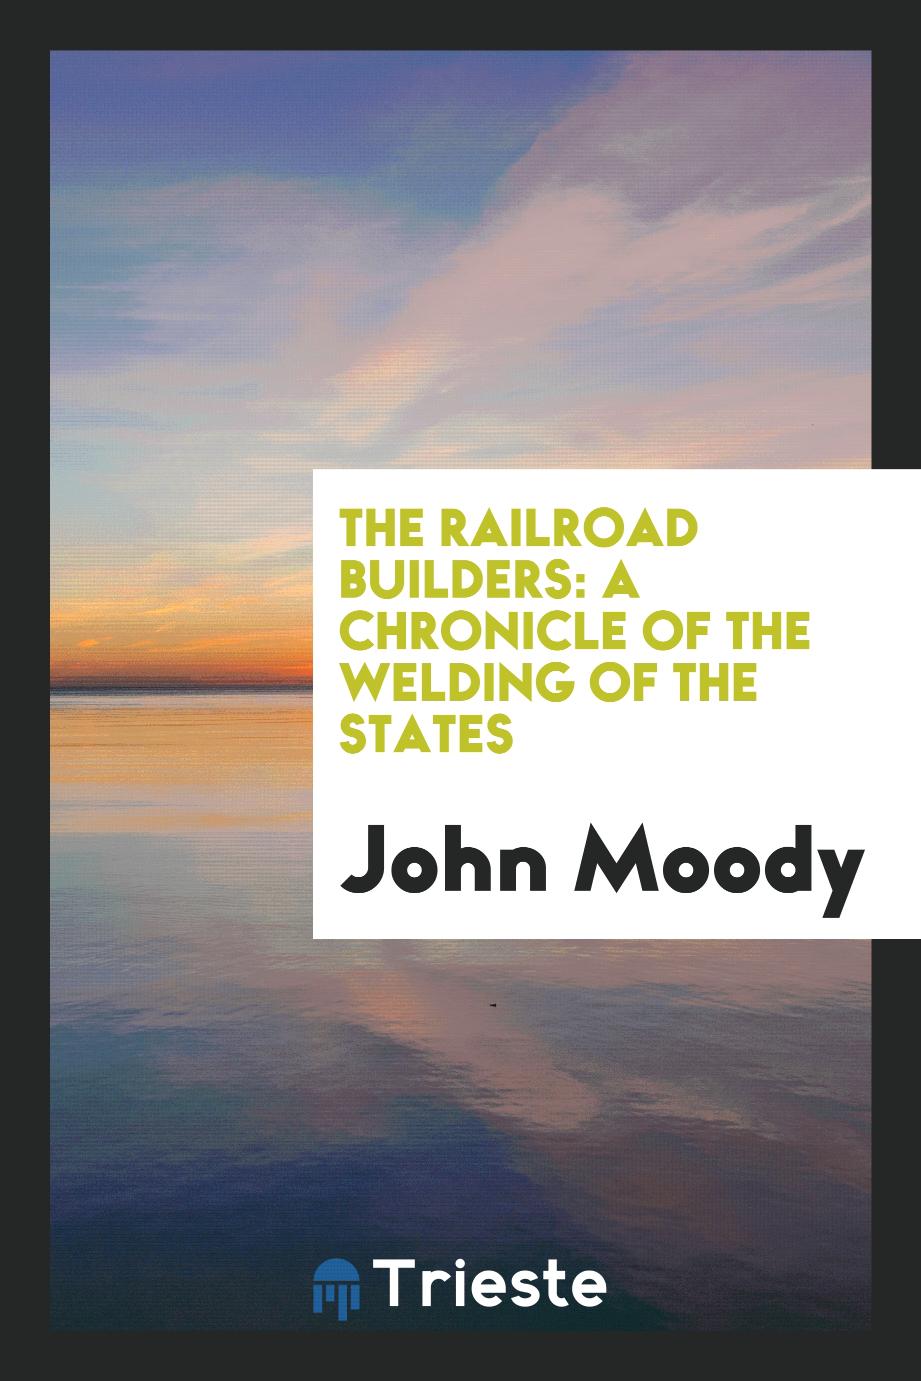 The railroad builders: a chronicle of the welding of the states